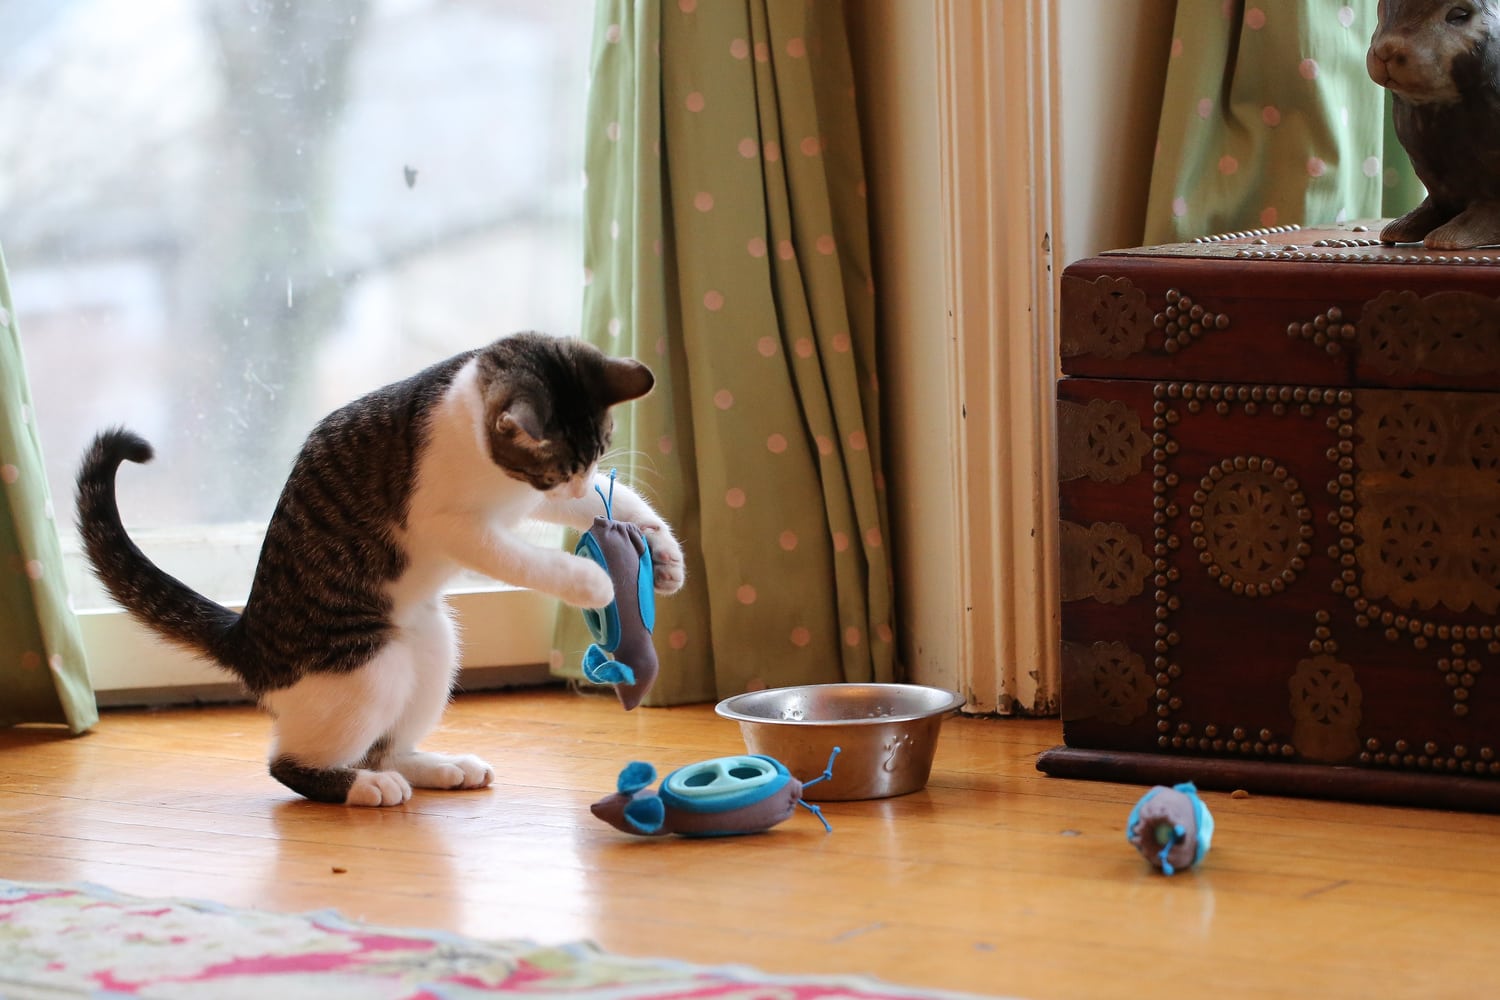 New Feeding System Could Bring Out the Natural Hunter In Your Cat